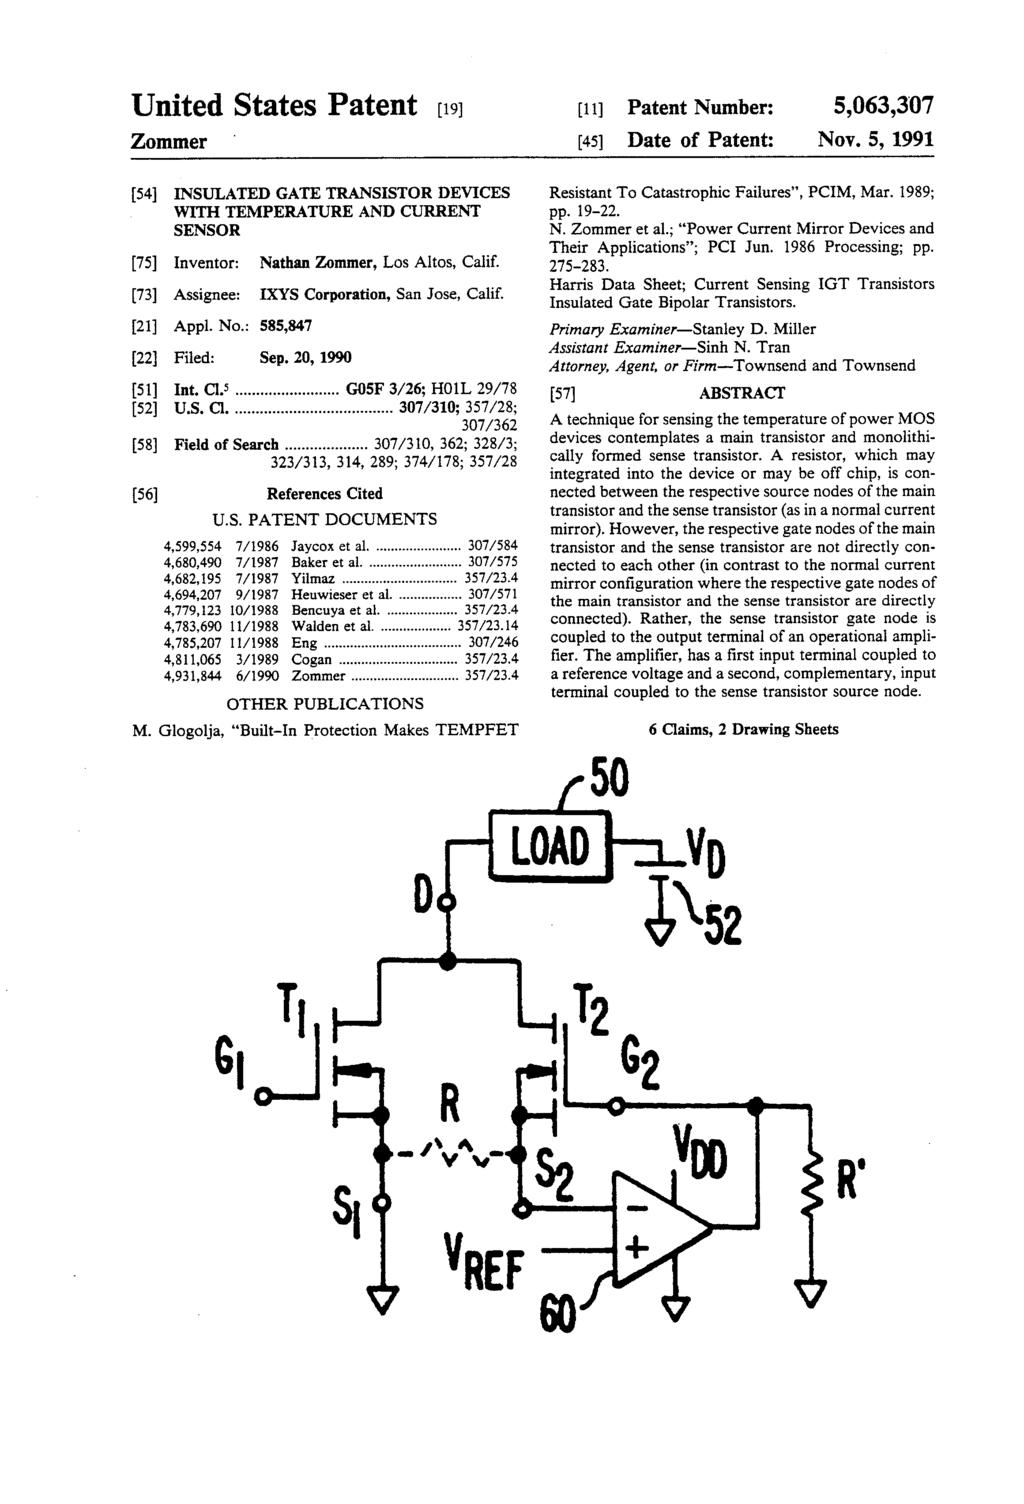 United States Patent (19) Zommer (11 Patent Number: (45) Date of Patent: Nov.